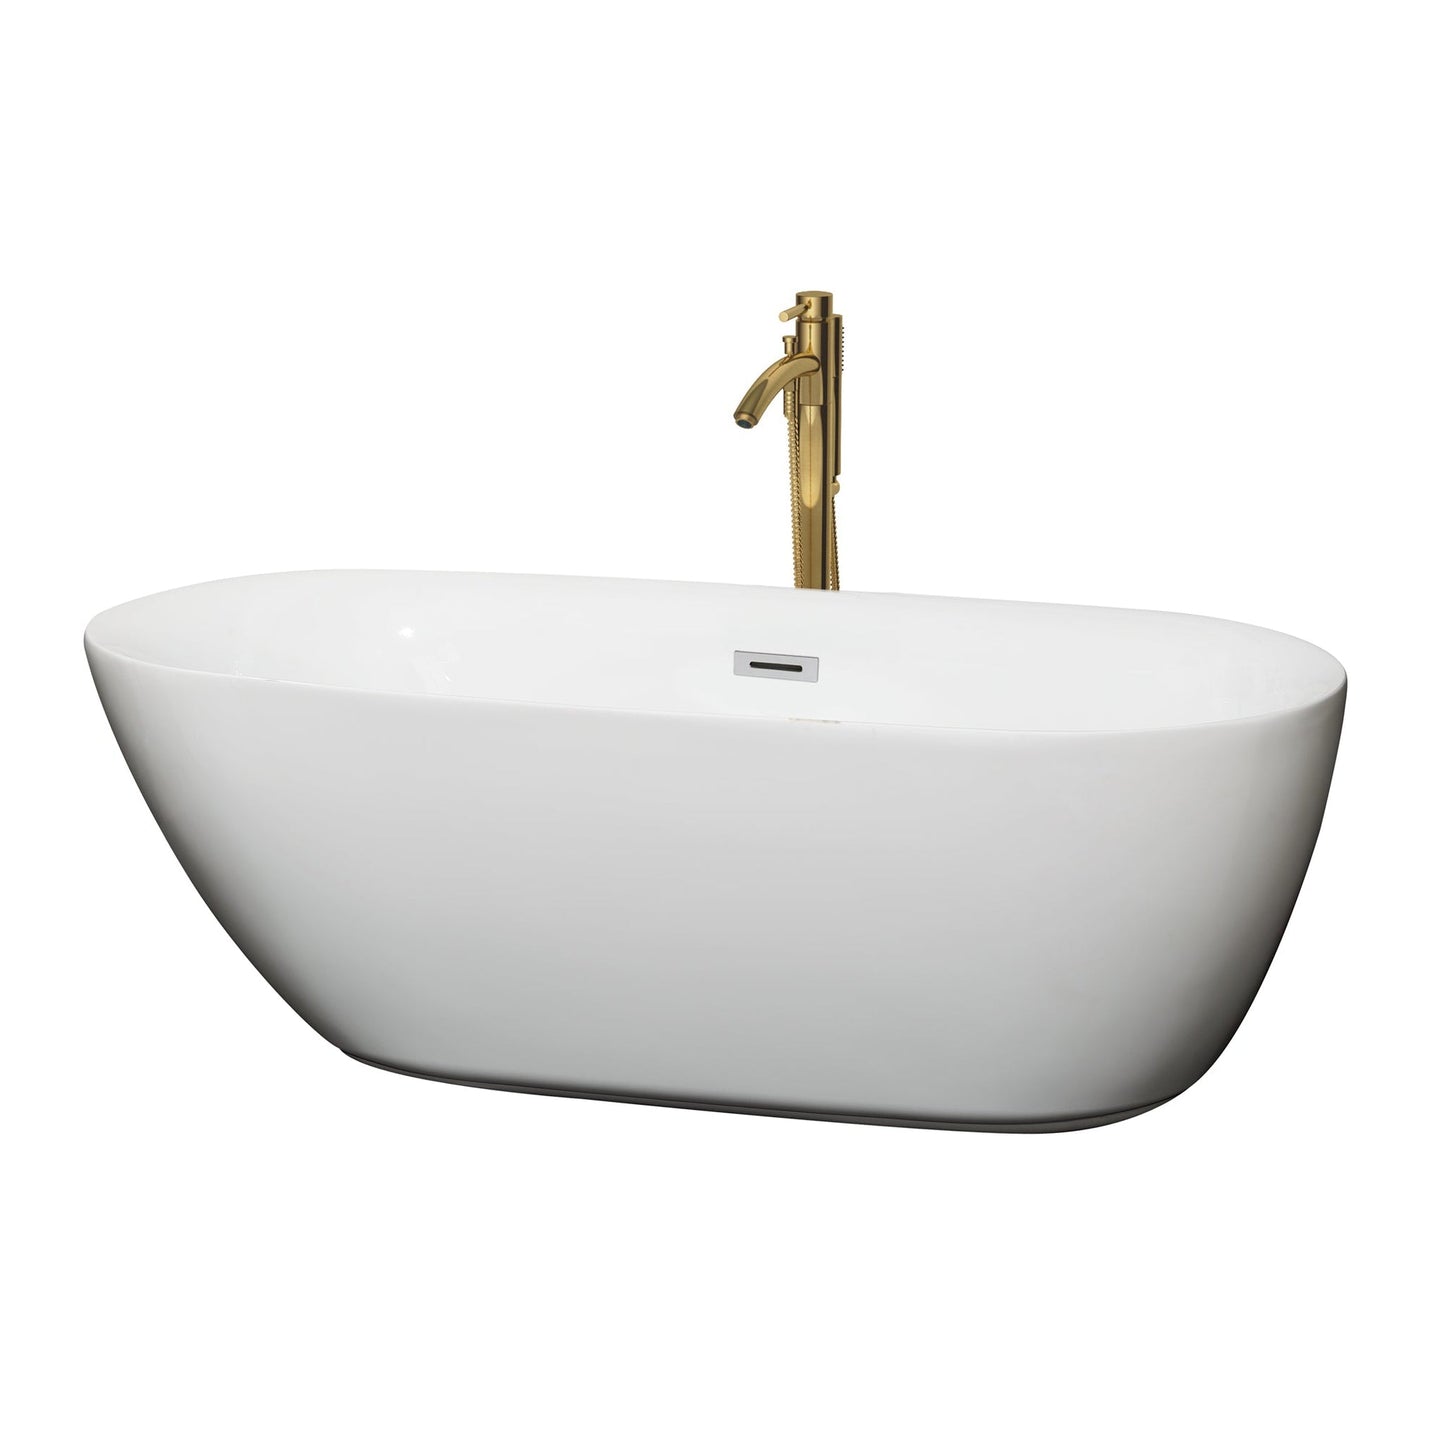 Wyndham Collection Melissa 65" Freestanding Bathtub in White With Polished Chrome Trim and Floor Mounted Faucet in Brushed Gold